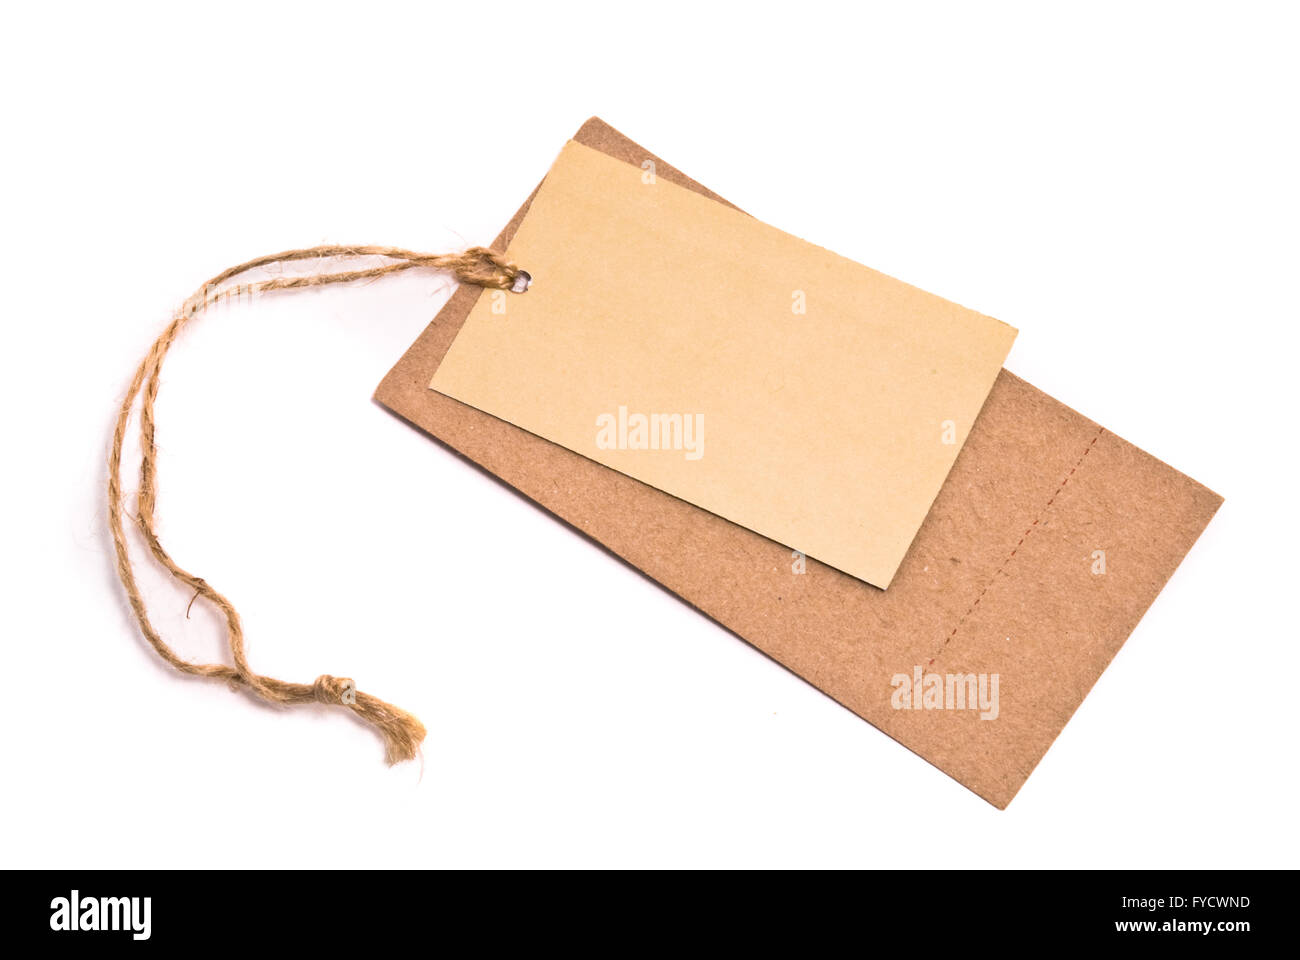 Blank tag tied with brown string. Stock Photo